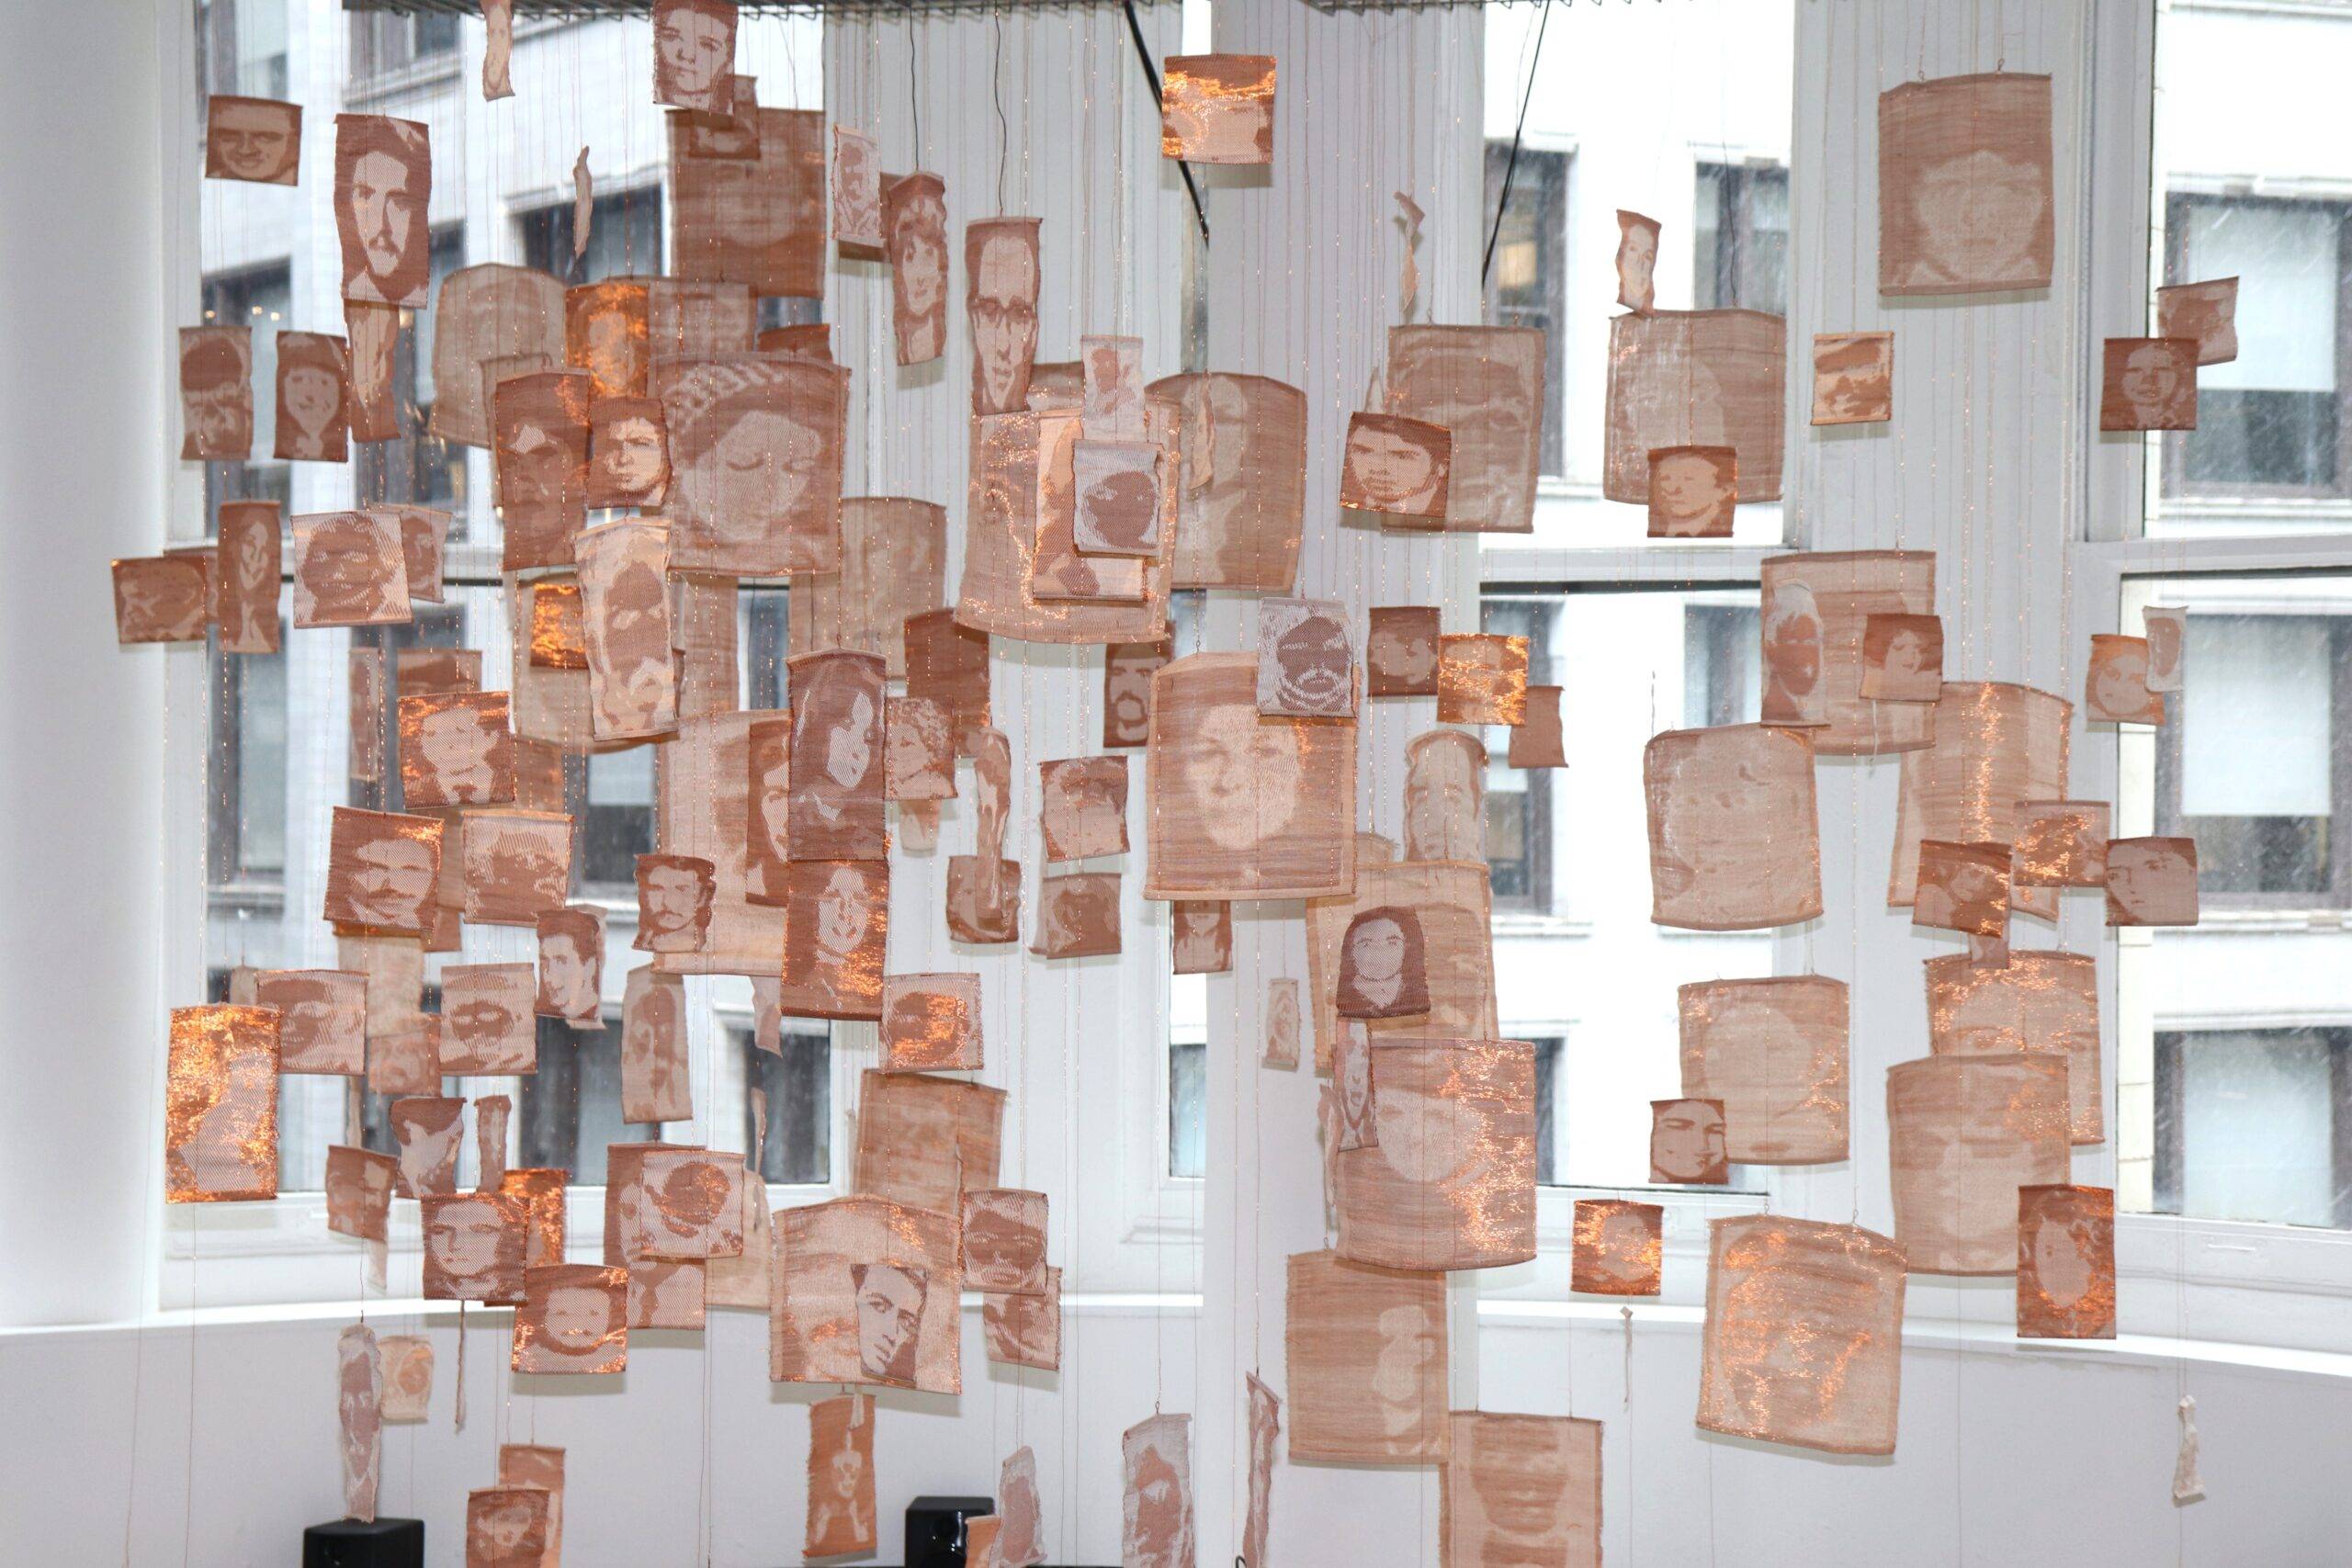 Copper portraits of disappeared Chileans hang in a white gallery space.